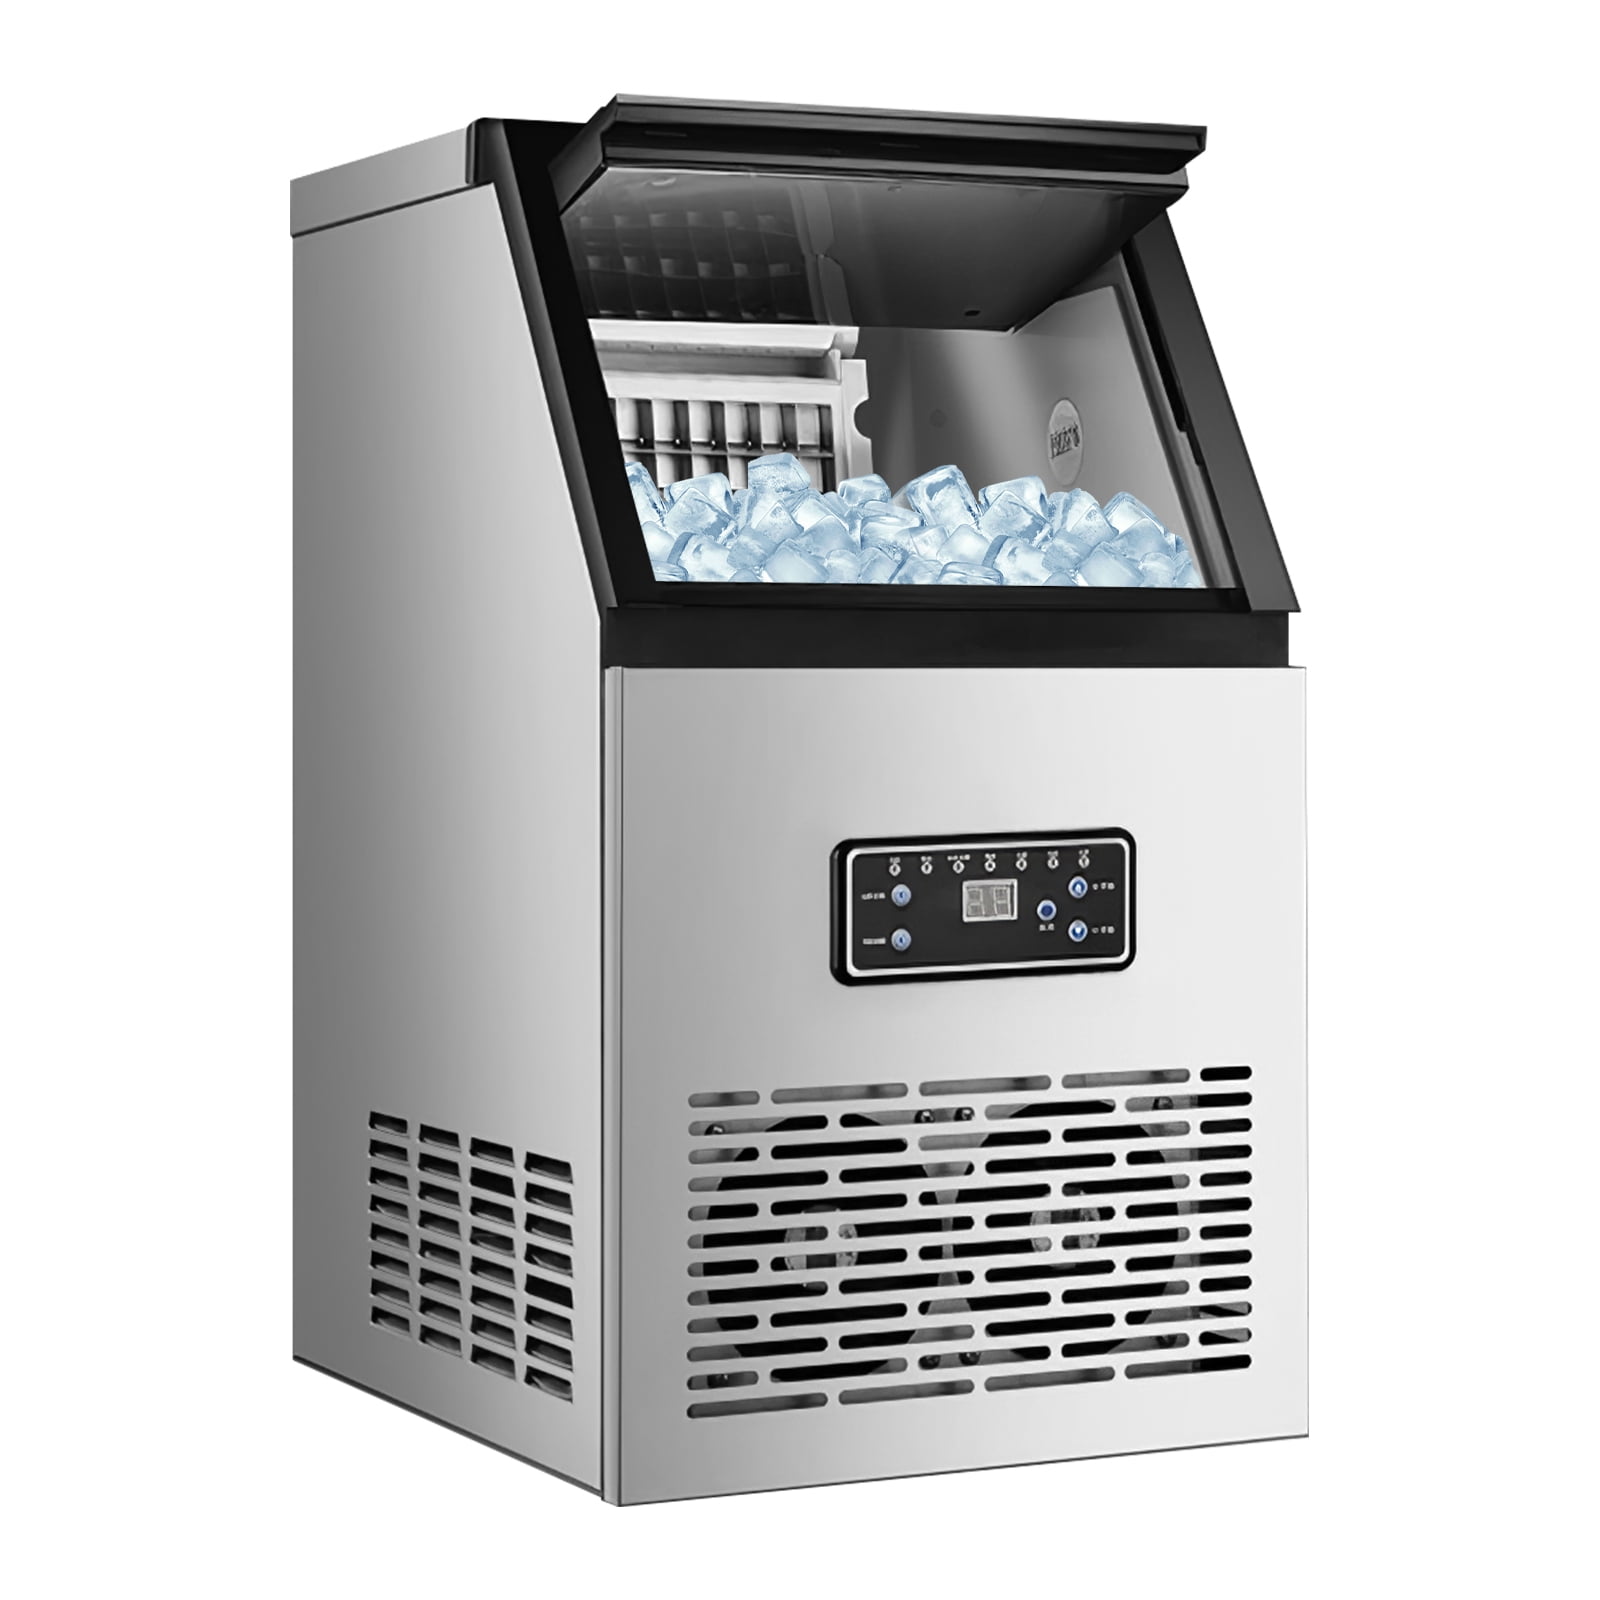 SYCEES Portable Nugget Ice Maker for Countertop, 33lbs/24h, 5lbs